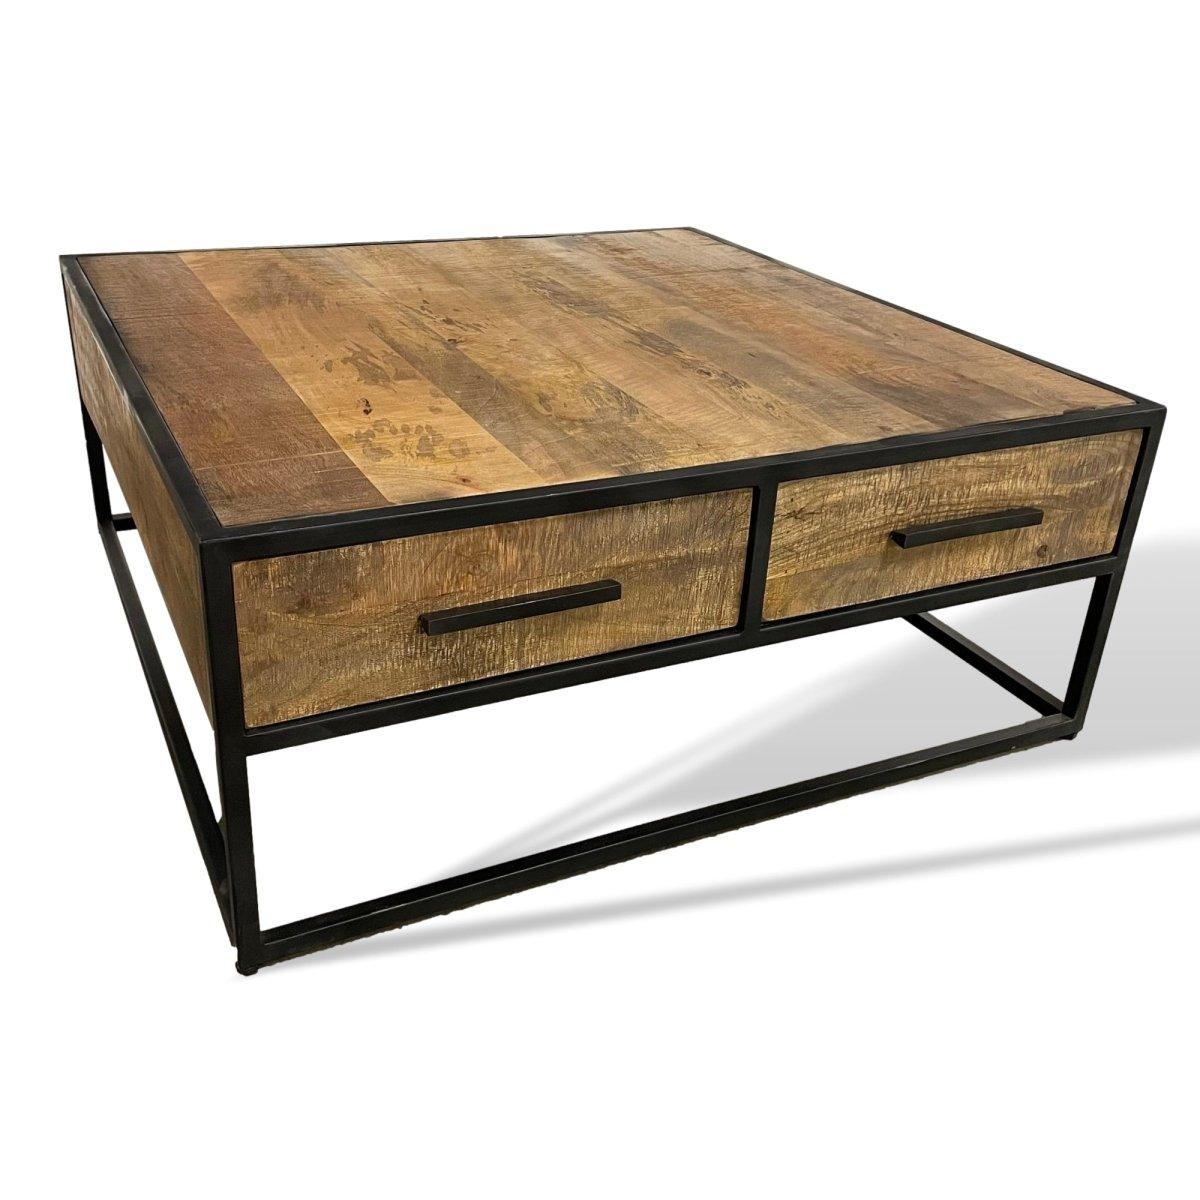 Watson Square Coffee Table - Rustic Furniture Outlet